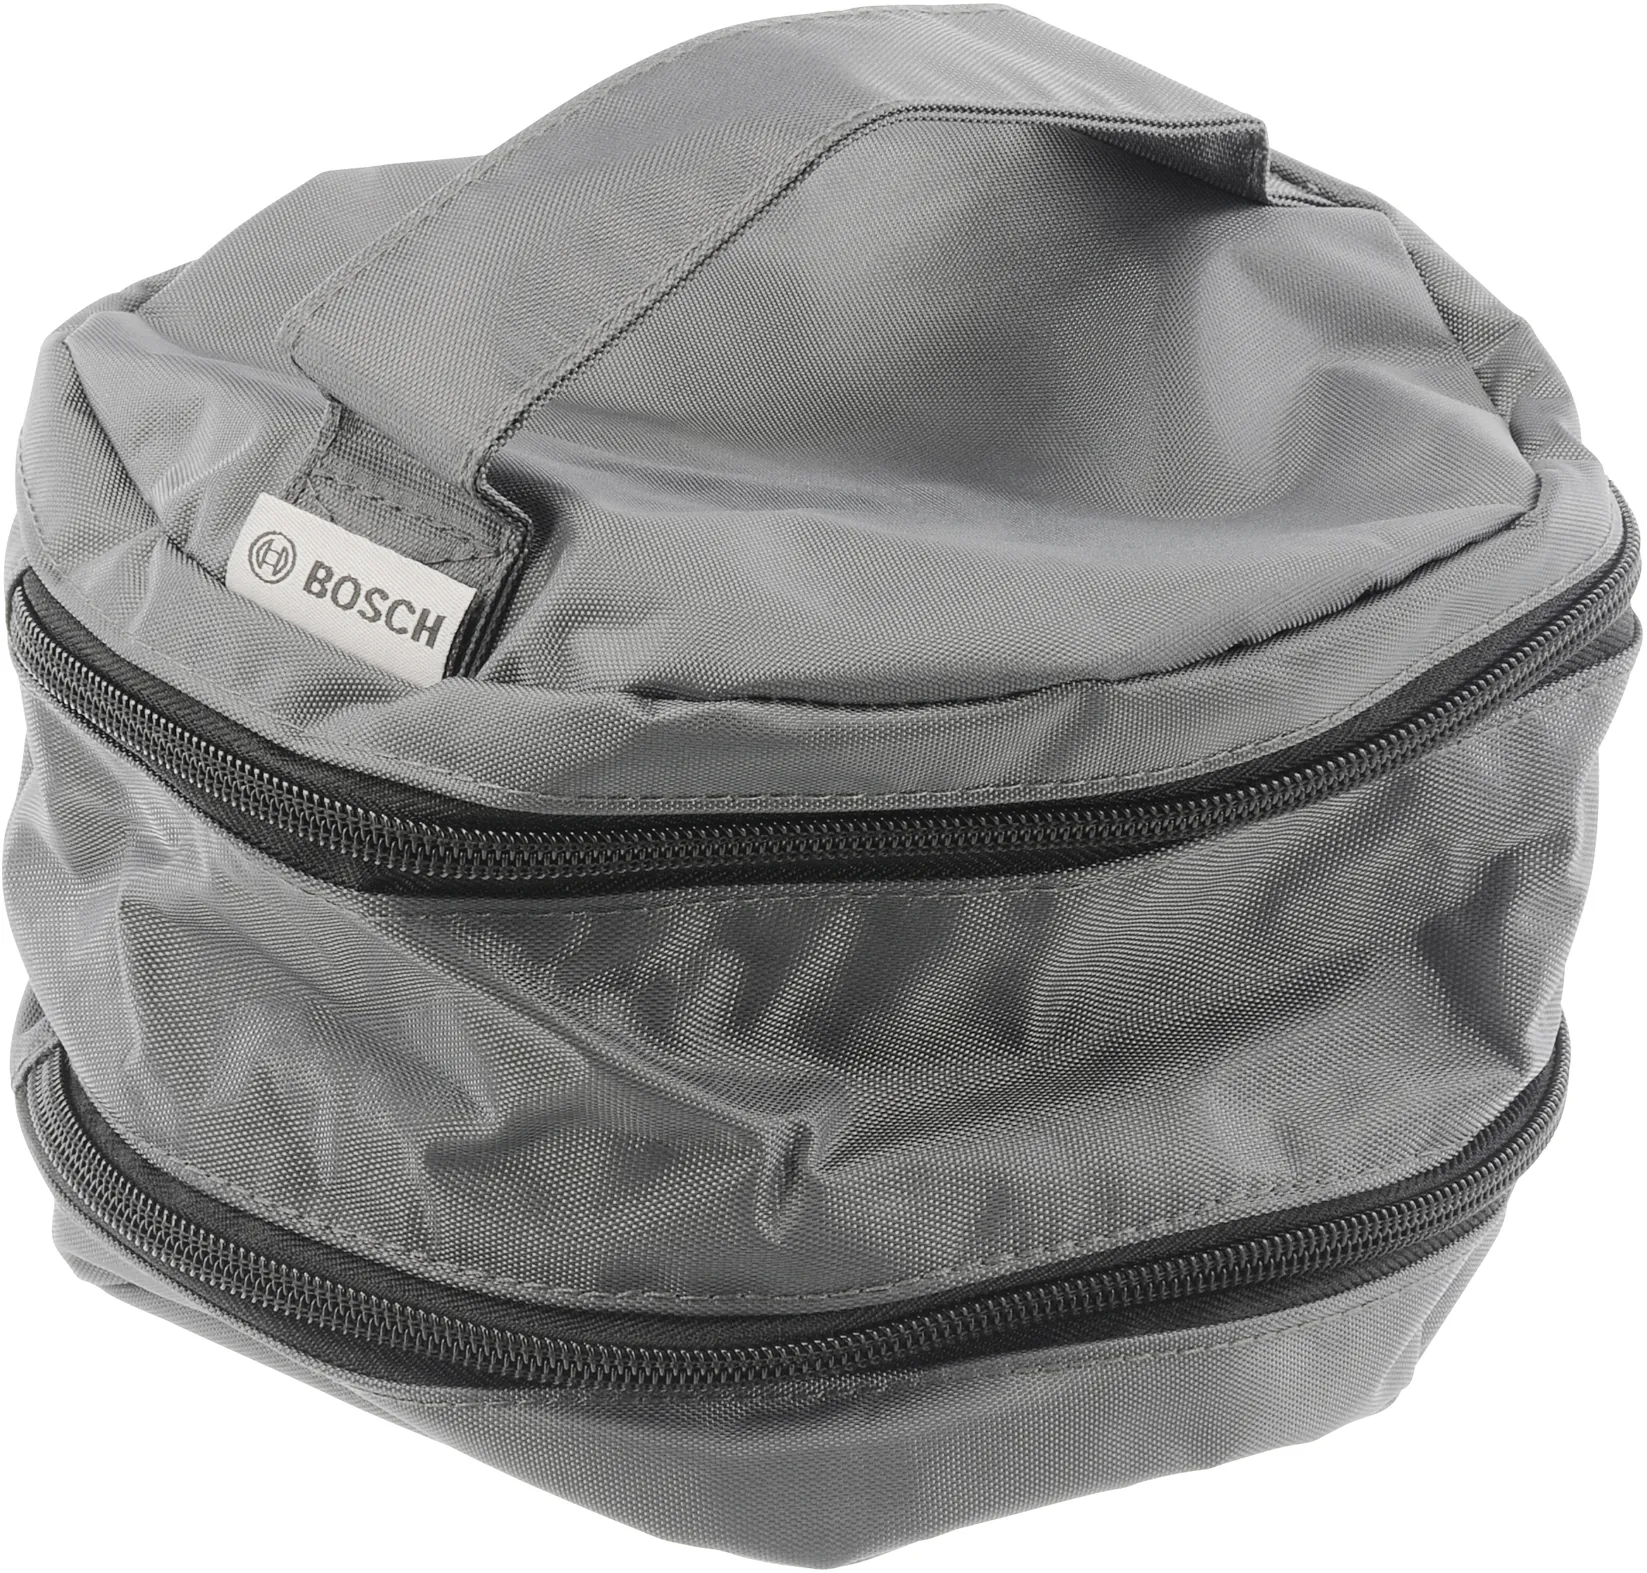 Bag Accessories bag, grey, Bosch label, D approx. 195mm, h approx. 125mm 